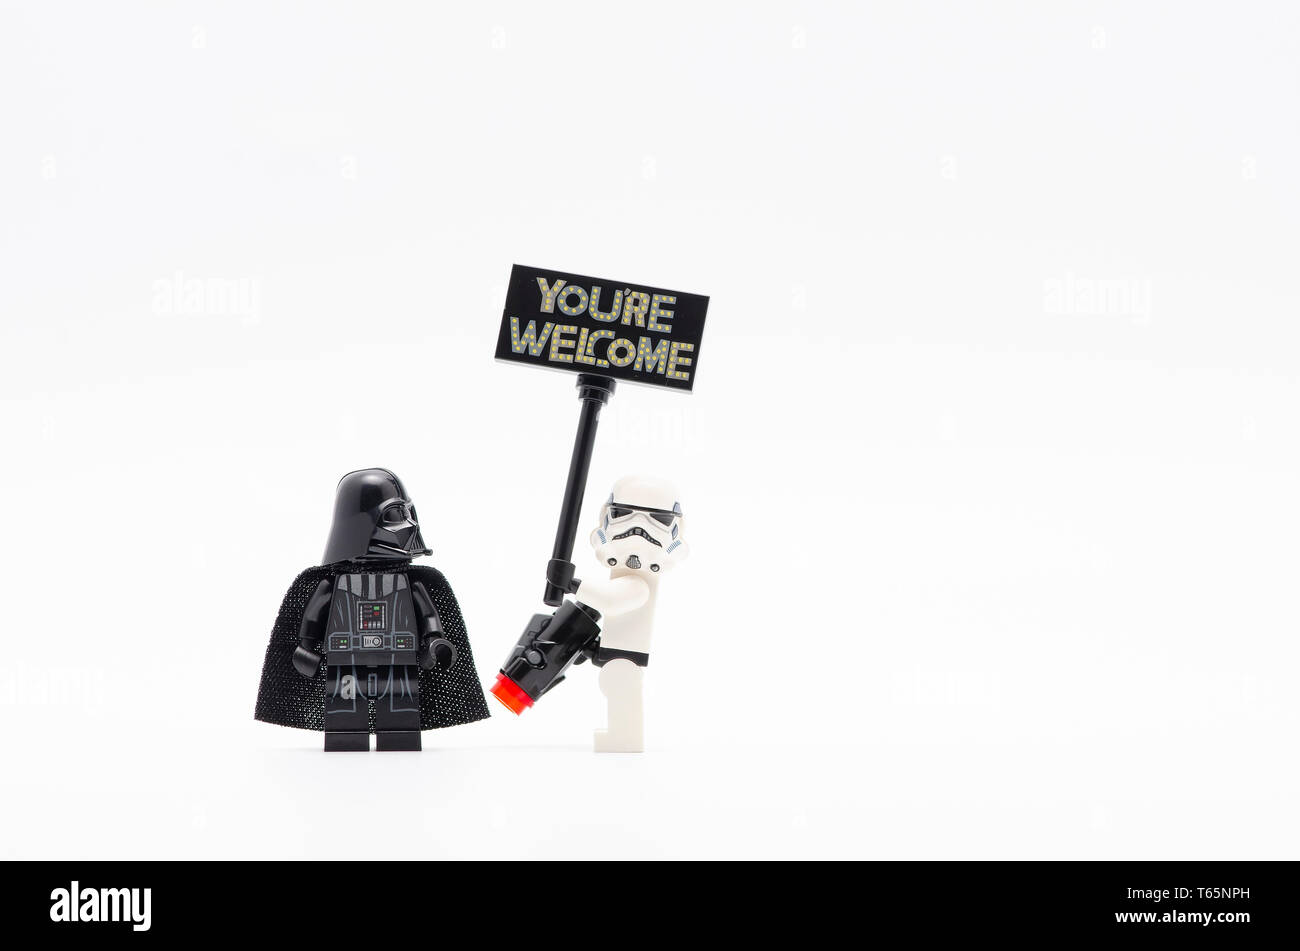 lego darth vader with storm trooper holding you are welcome sign. Lego  minifigures are manufactured by The Lego Group Stock Photo - Alamy